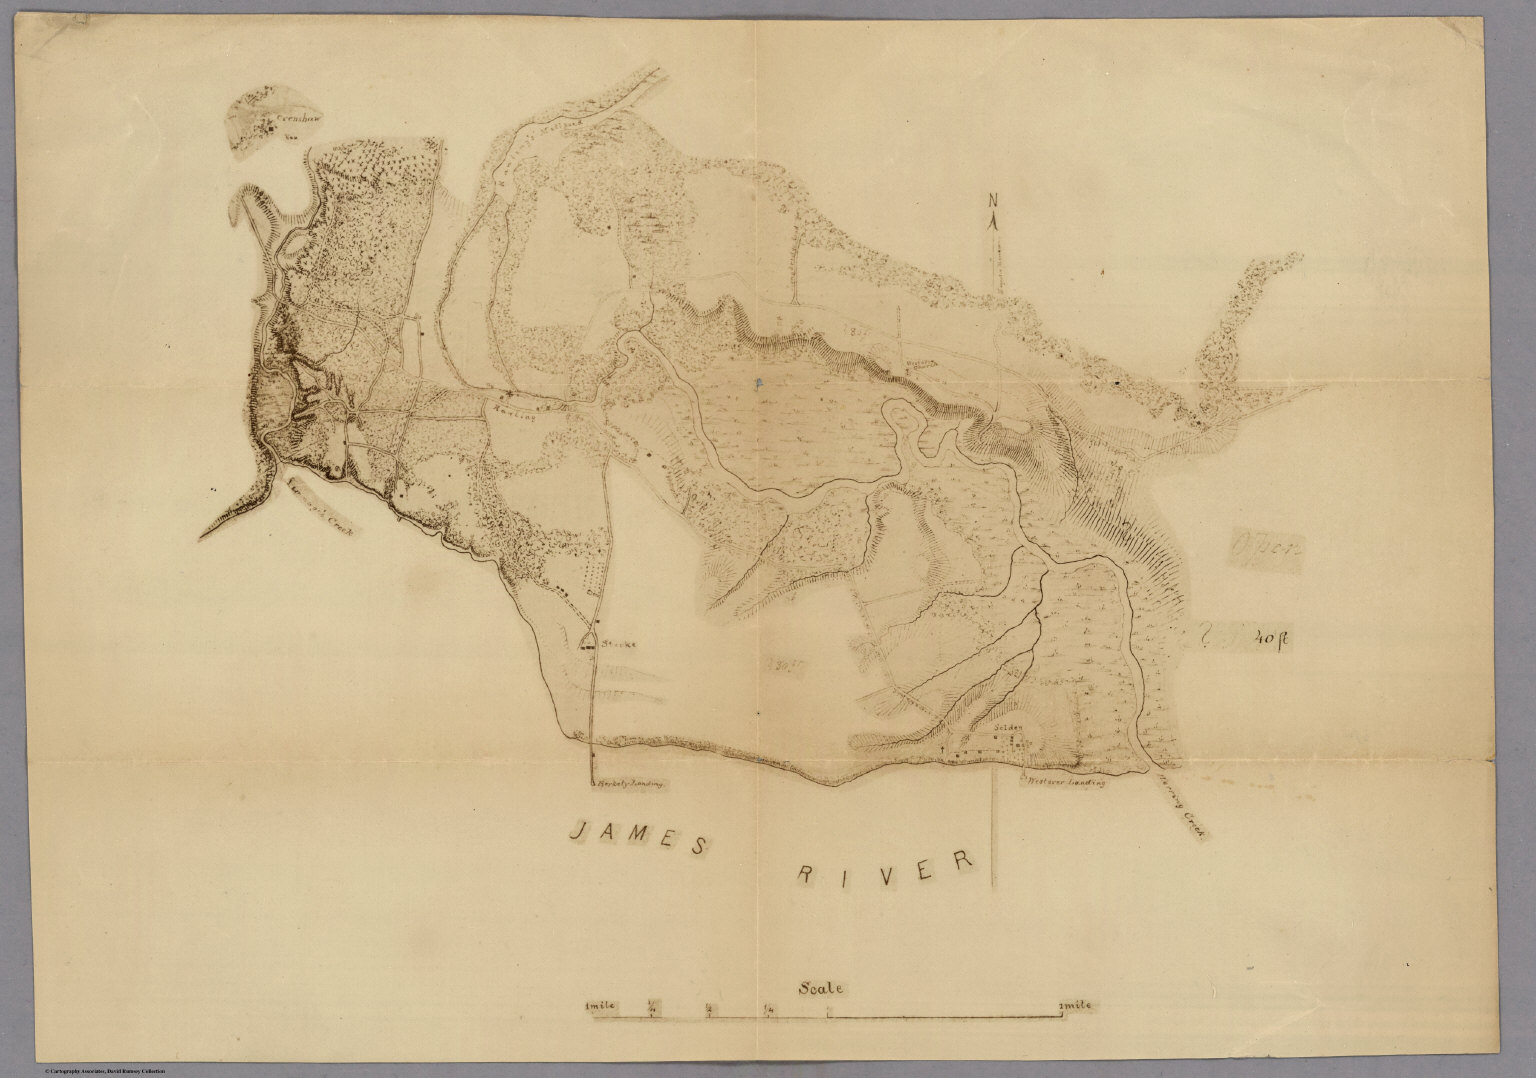 James River David Rumsey Historical Map Collection